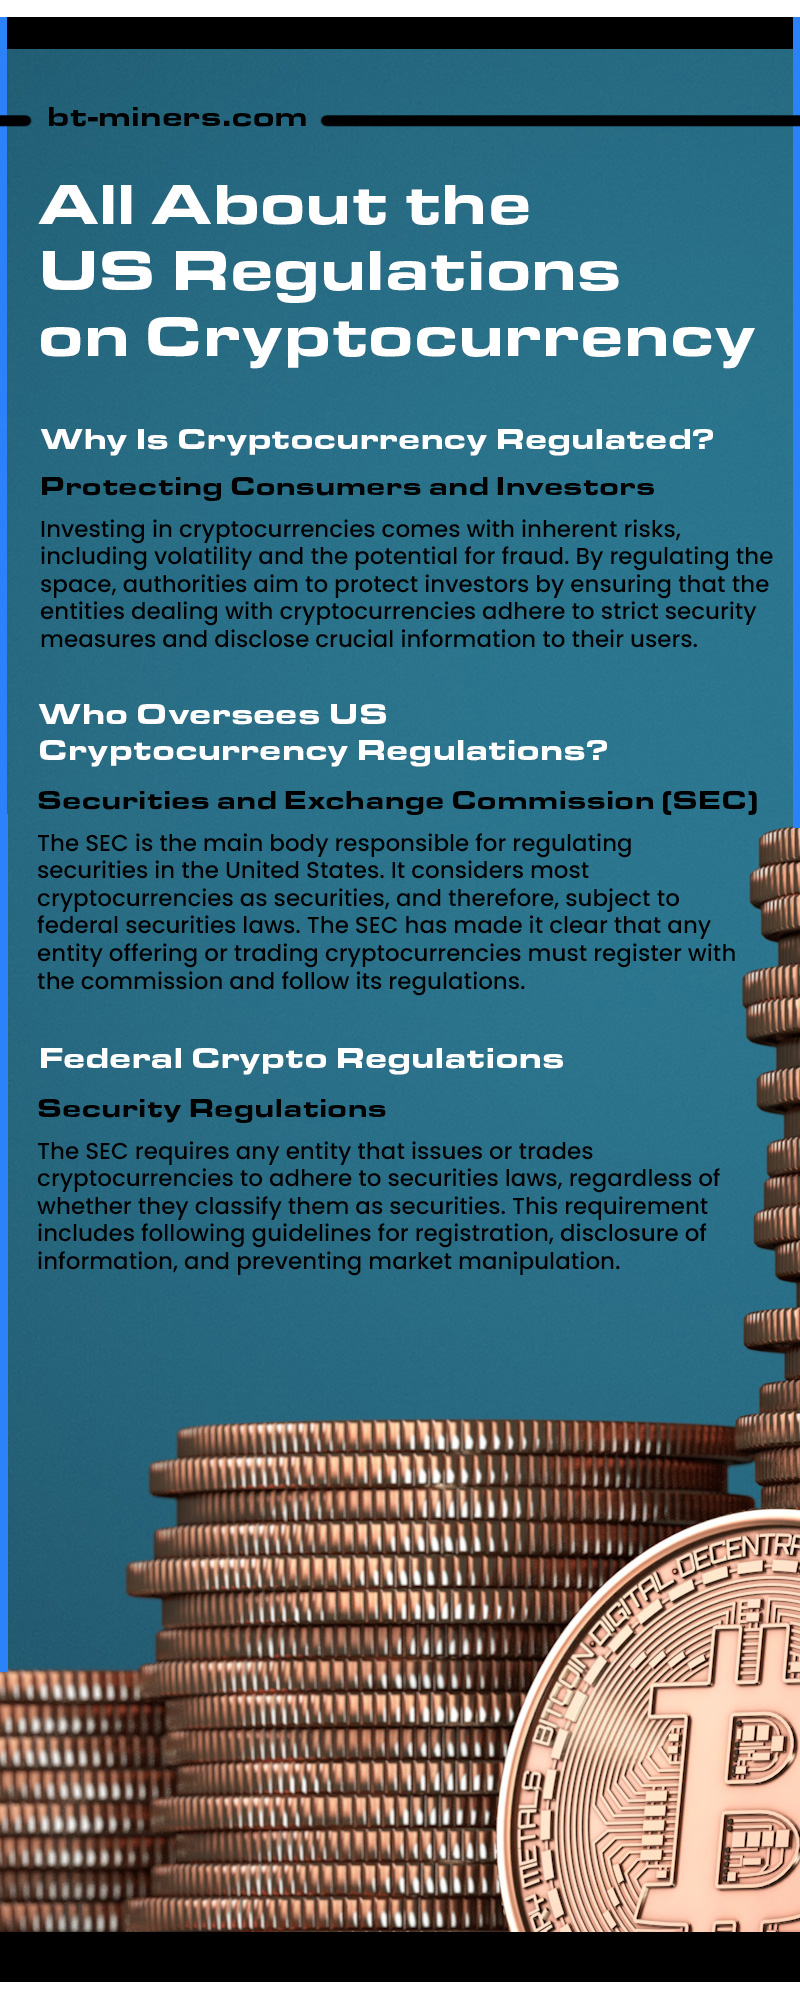 All About the US Regulations on Cryptocurrency